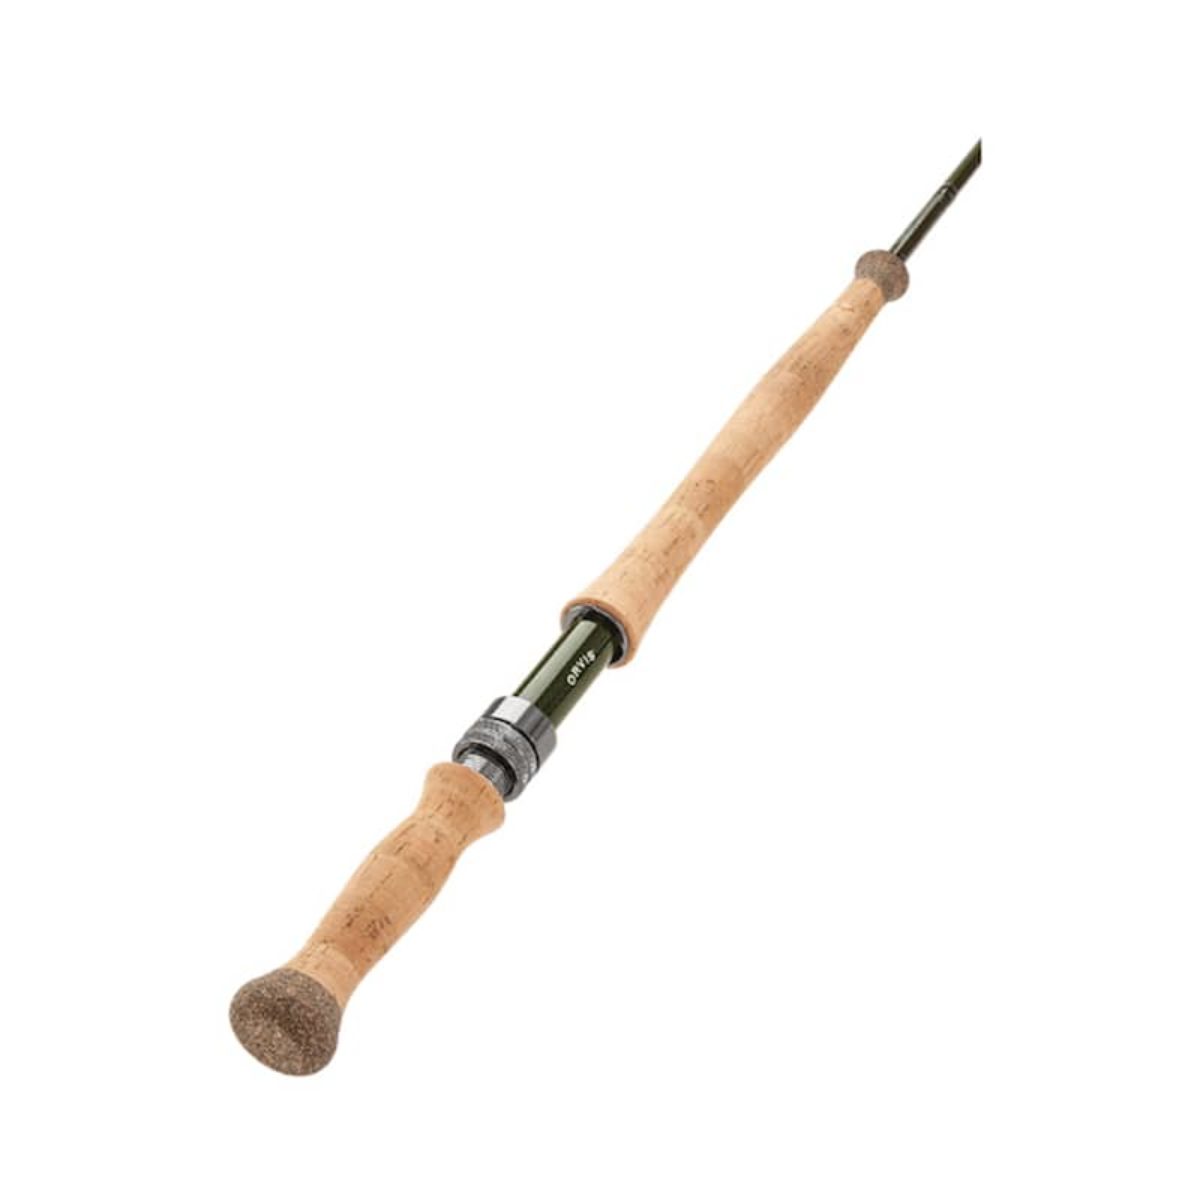 Fly Fishing Rods: Orvis Glass, Fiberglass, Carbon: Bent Rod Outdoors